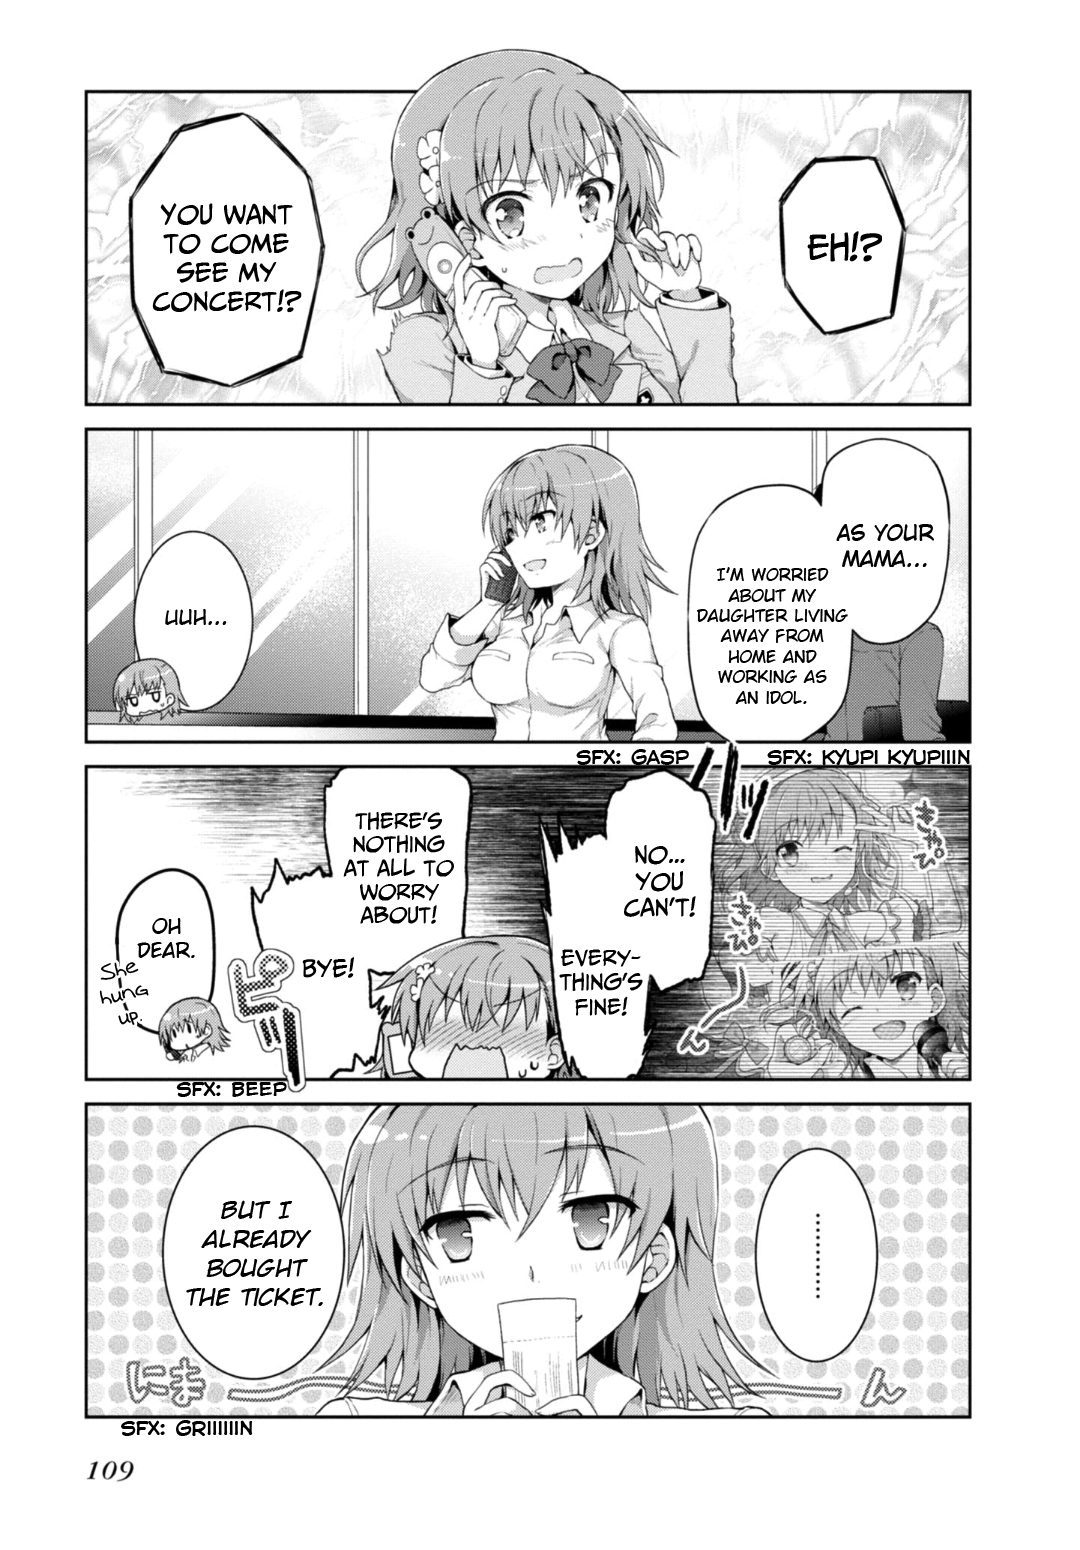 A Certain Idol Accelerator - Page 1